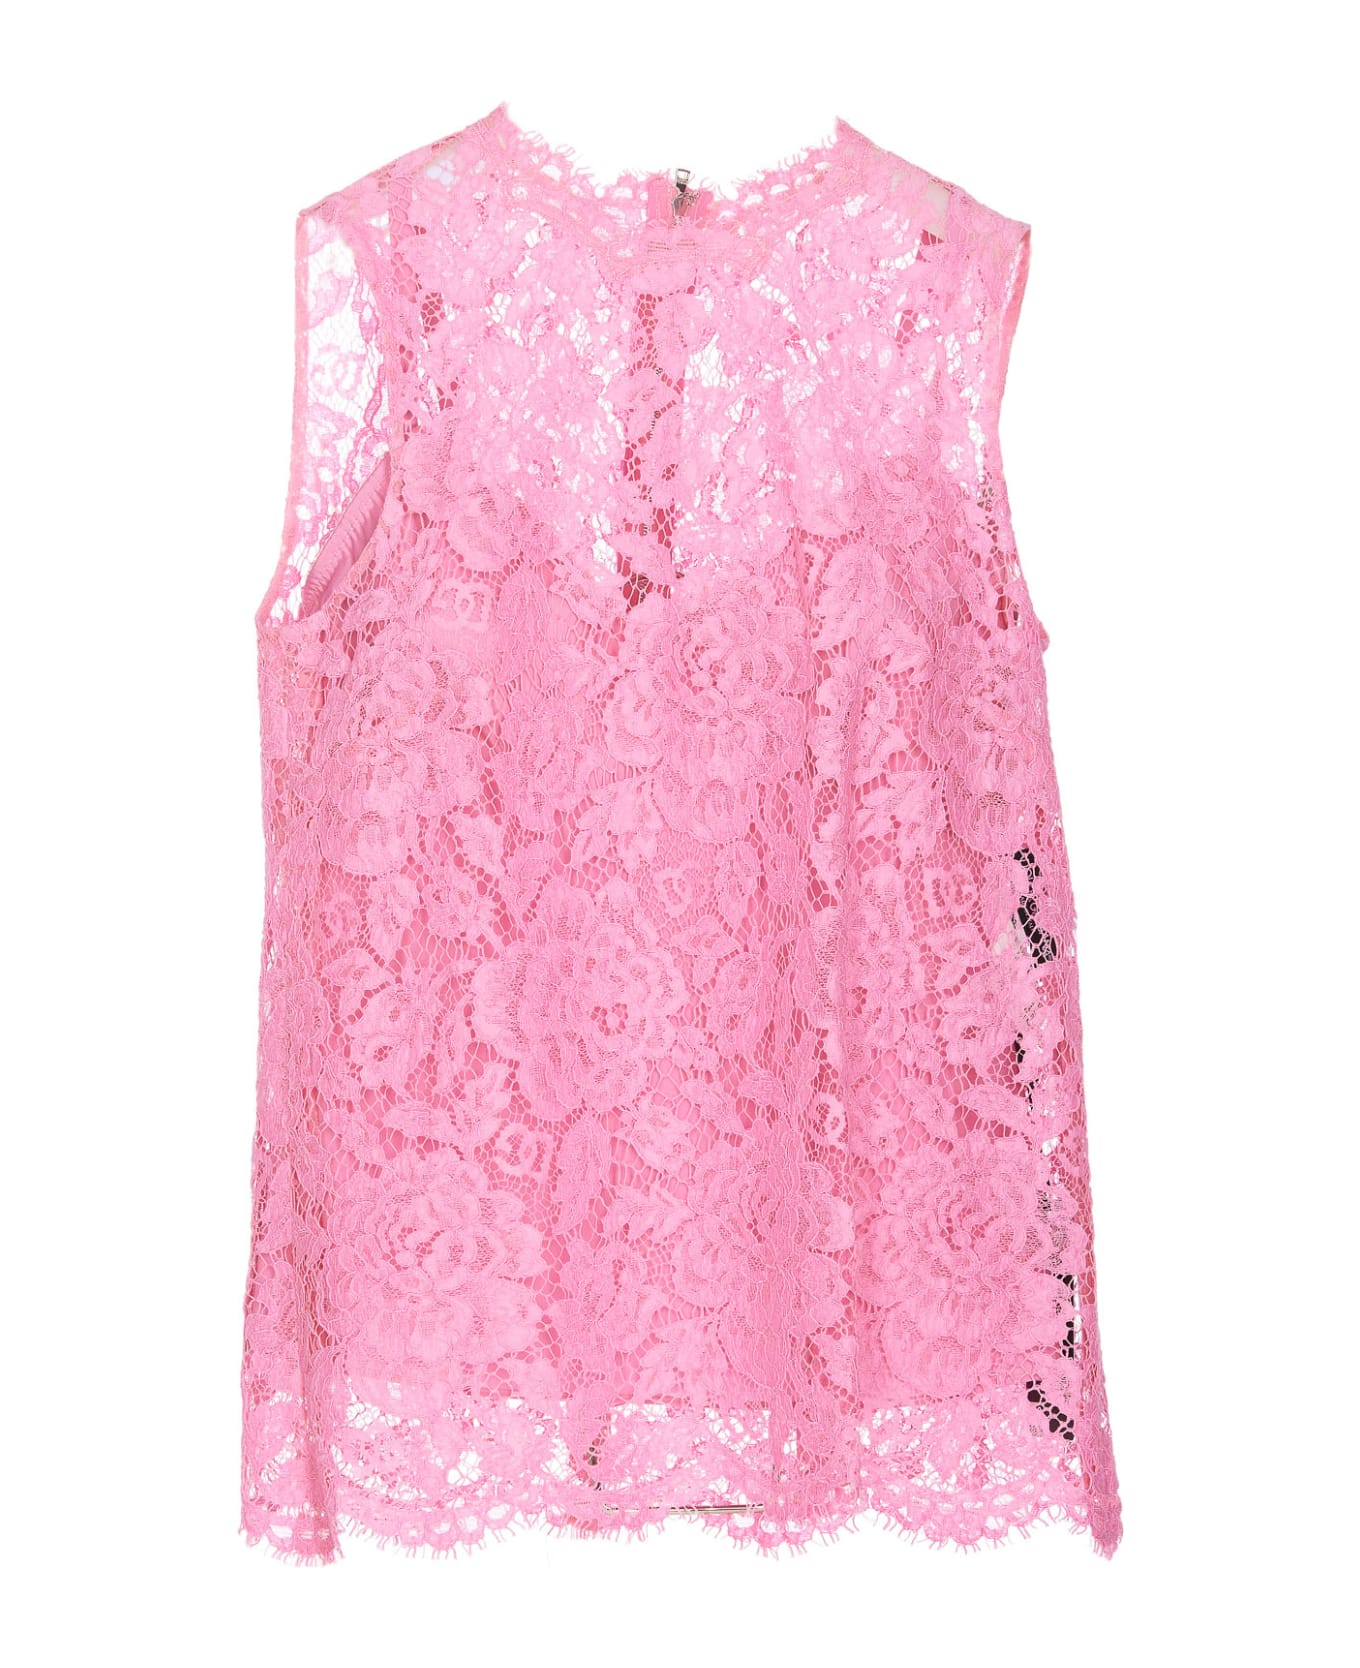 Dolce & Gabbana Cordonetto Lace Top - Pink